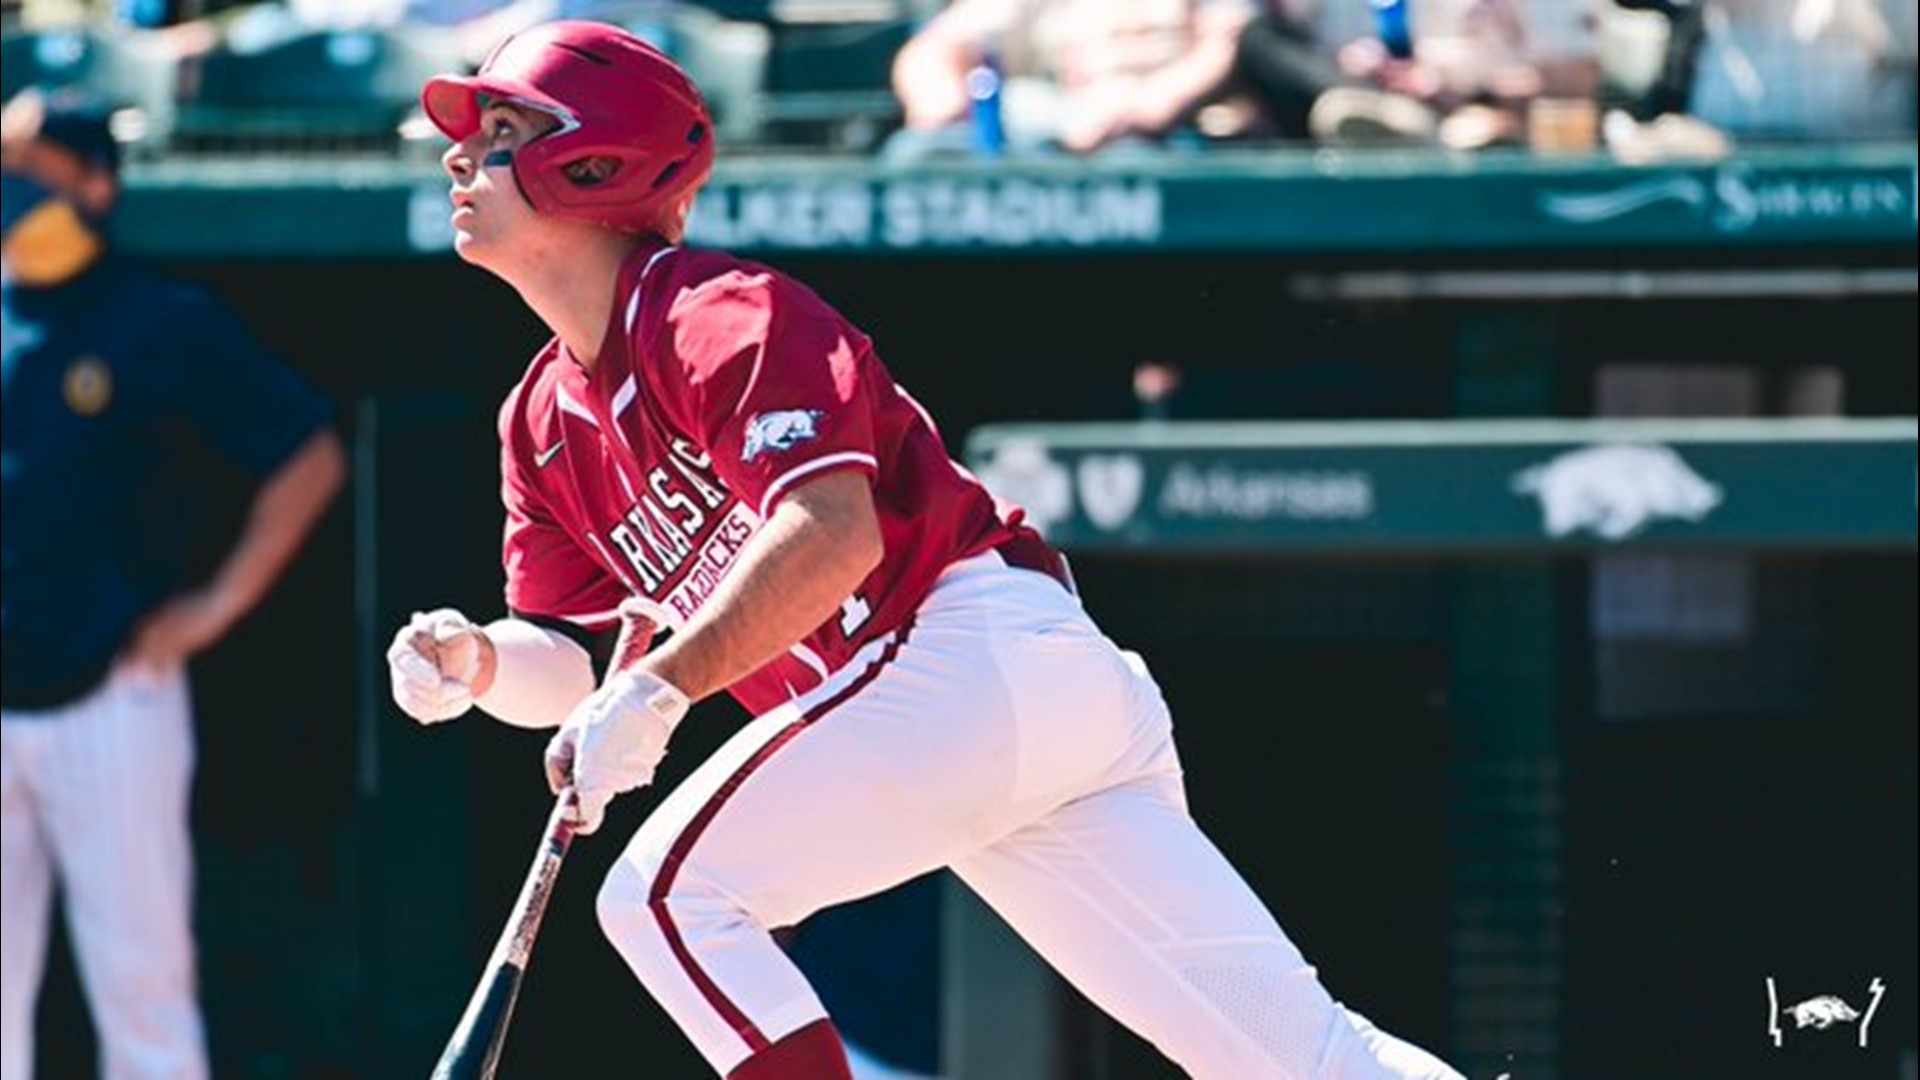 Moore's 2-run home run in the 7th put Arkansas in front for good. On the night, Moore was 2-4 with two home runs and three RBI, his second multi-HR game of the year